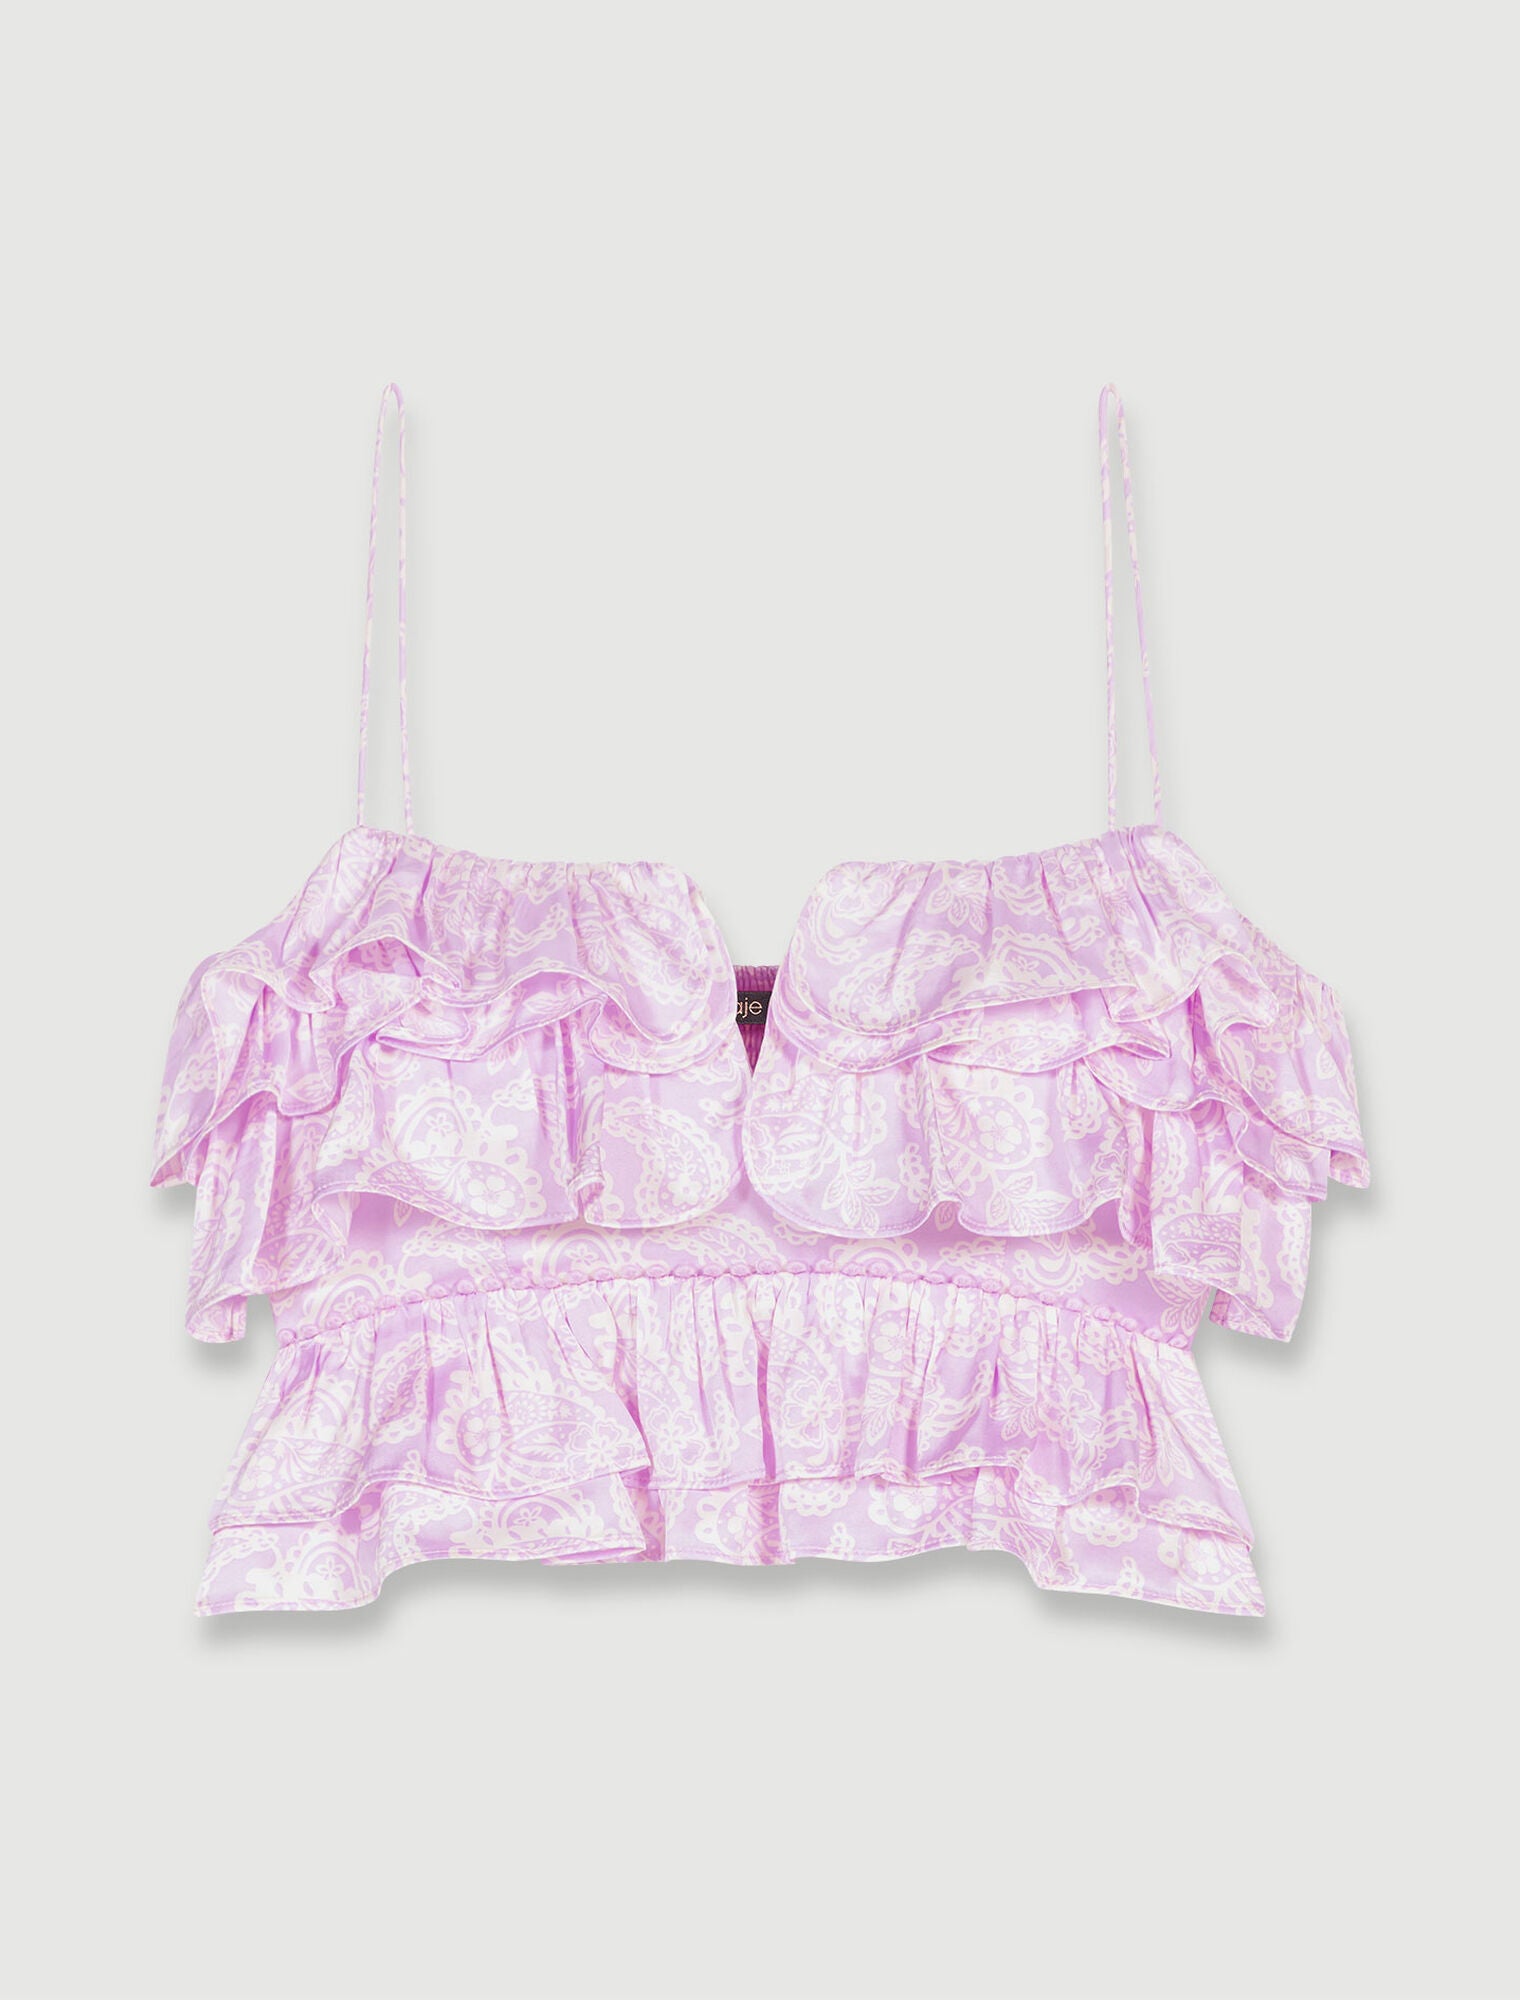 Pink Cashmere Print Patterned ruffled crop top